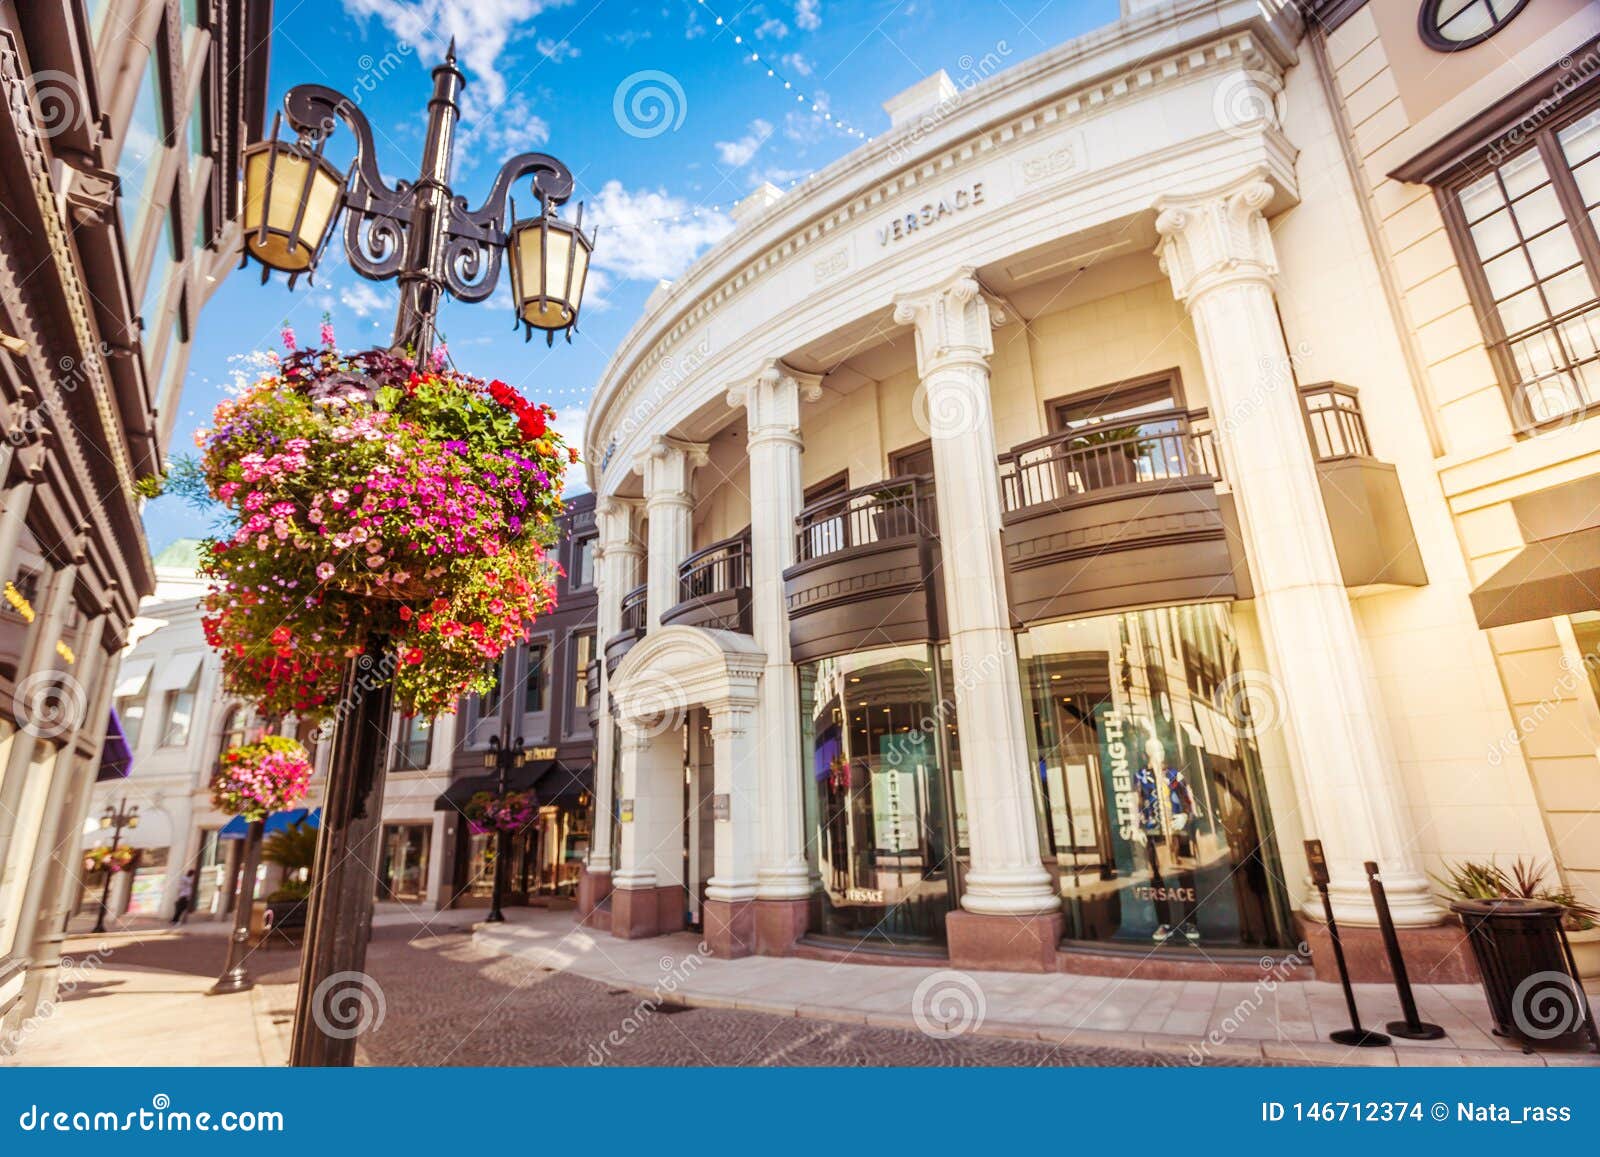 Versace Shop on Rodeo Drive in Los Angeles Editorial Stock Image